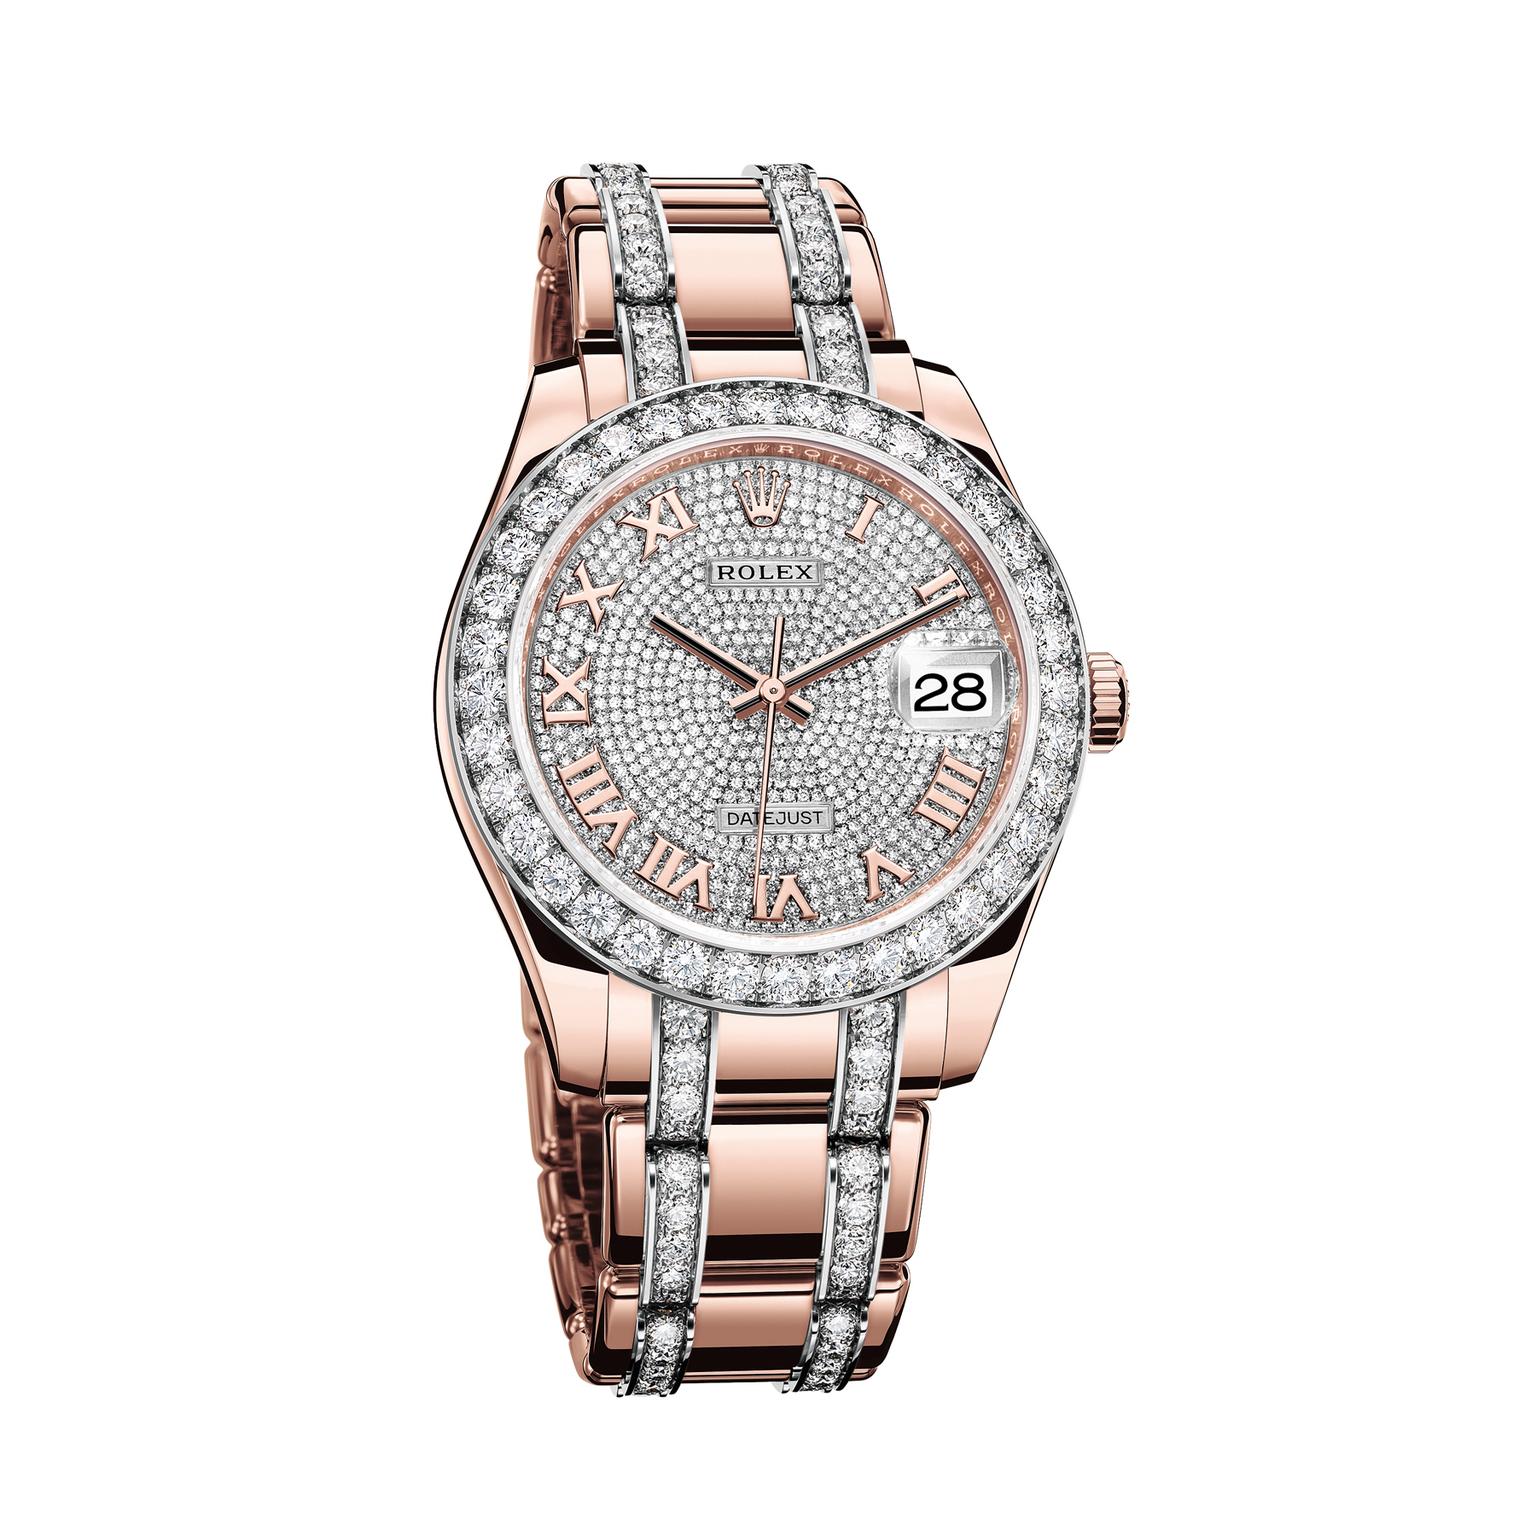 Rolex Pearlmaster 39mm watch in Everose gold with diamonds